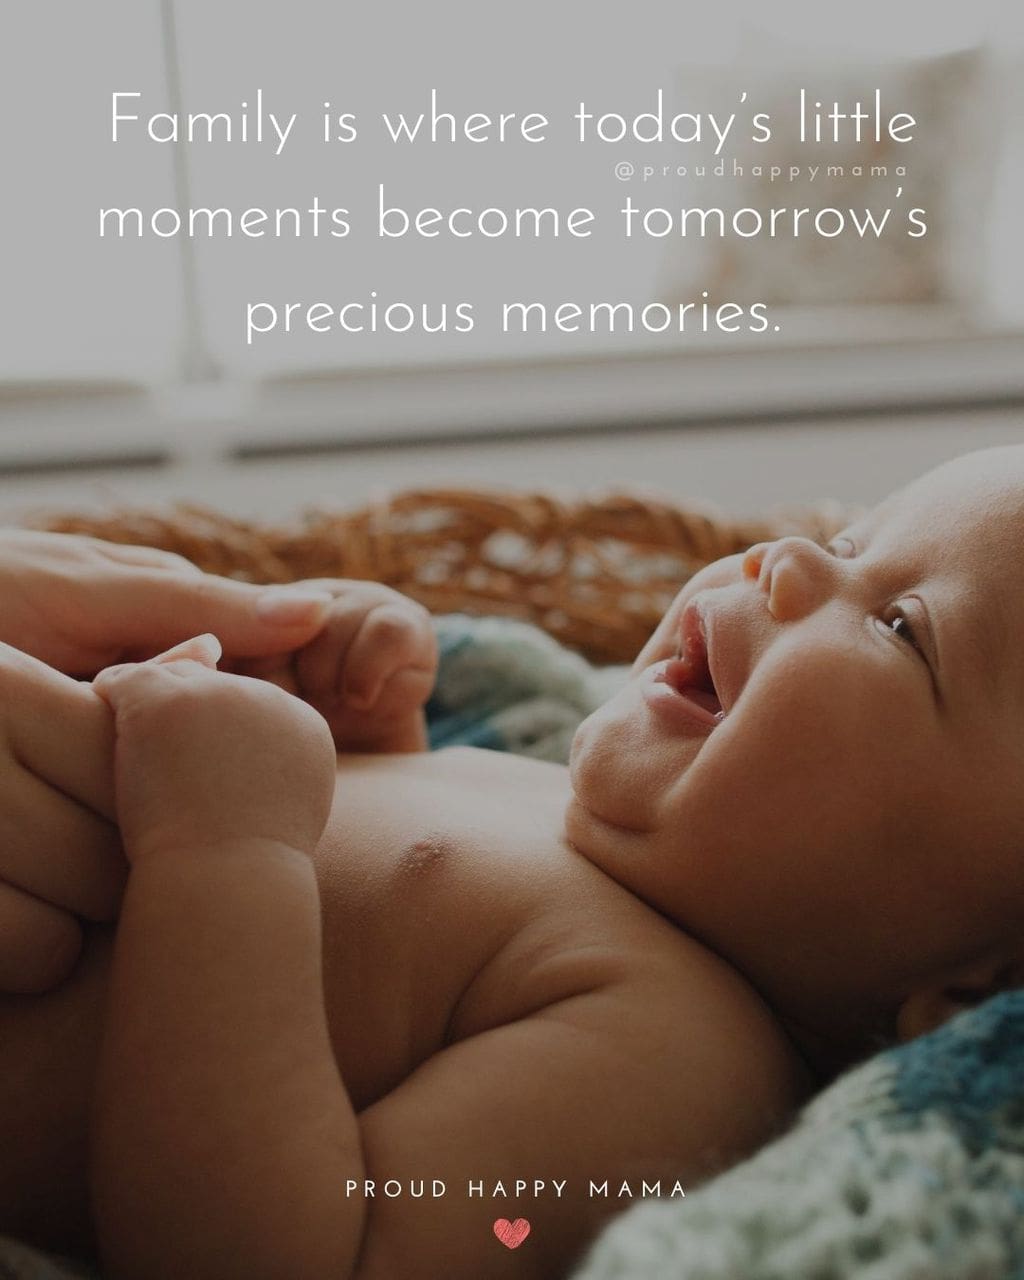 Quotes Happy Family | Family is where today’s little moments become tomorrow’s precious memories.